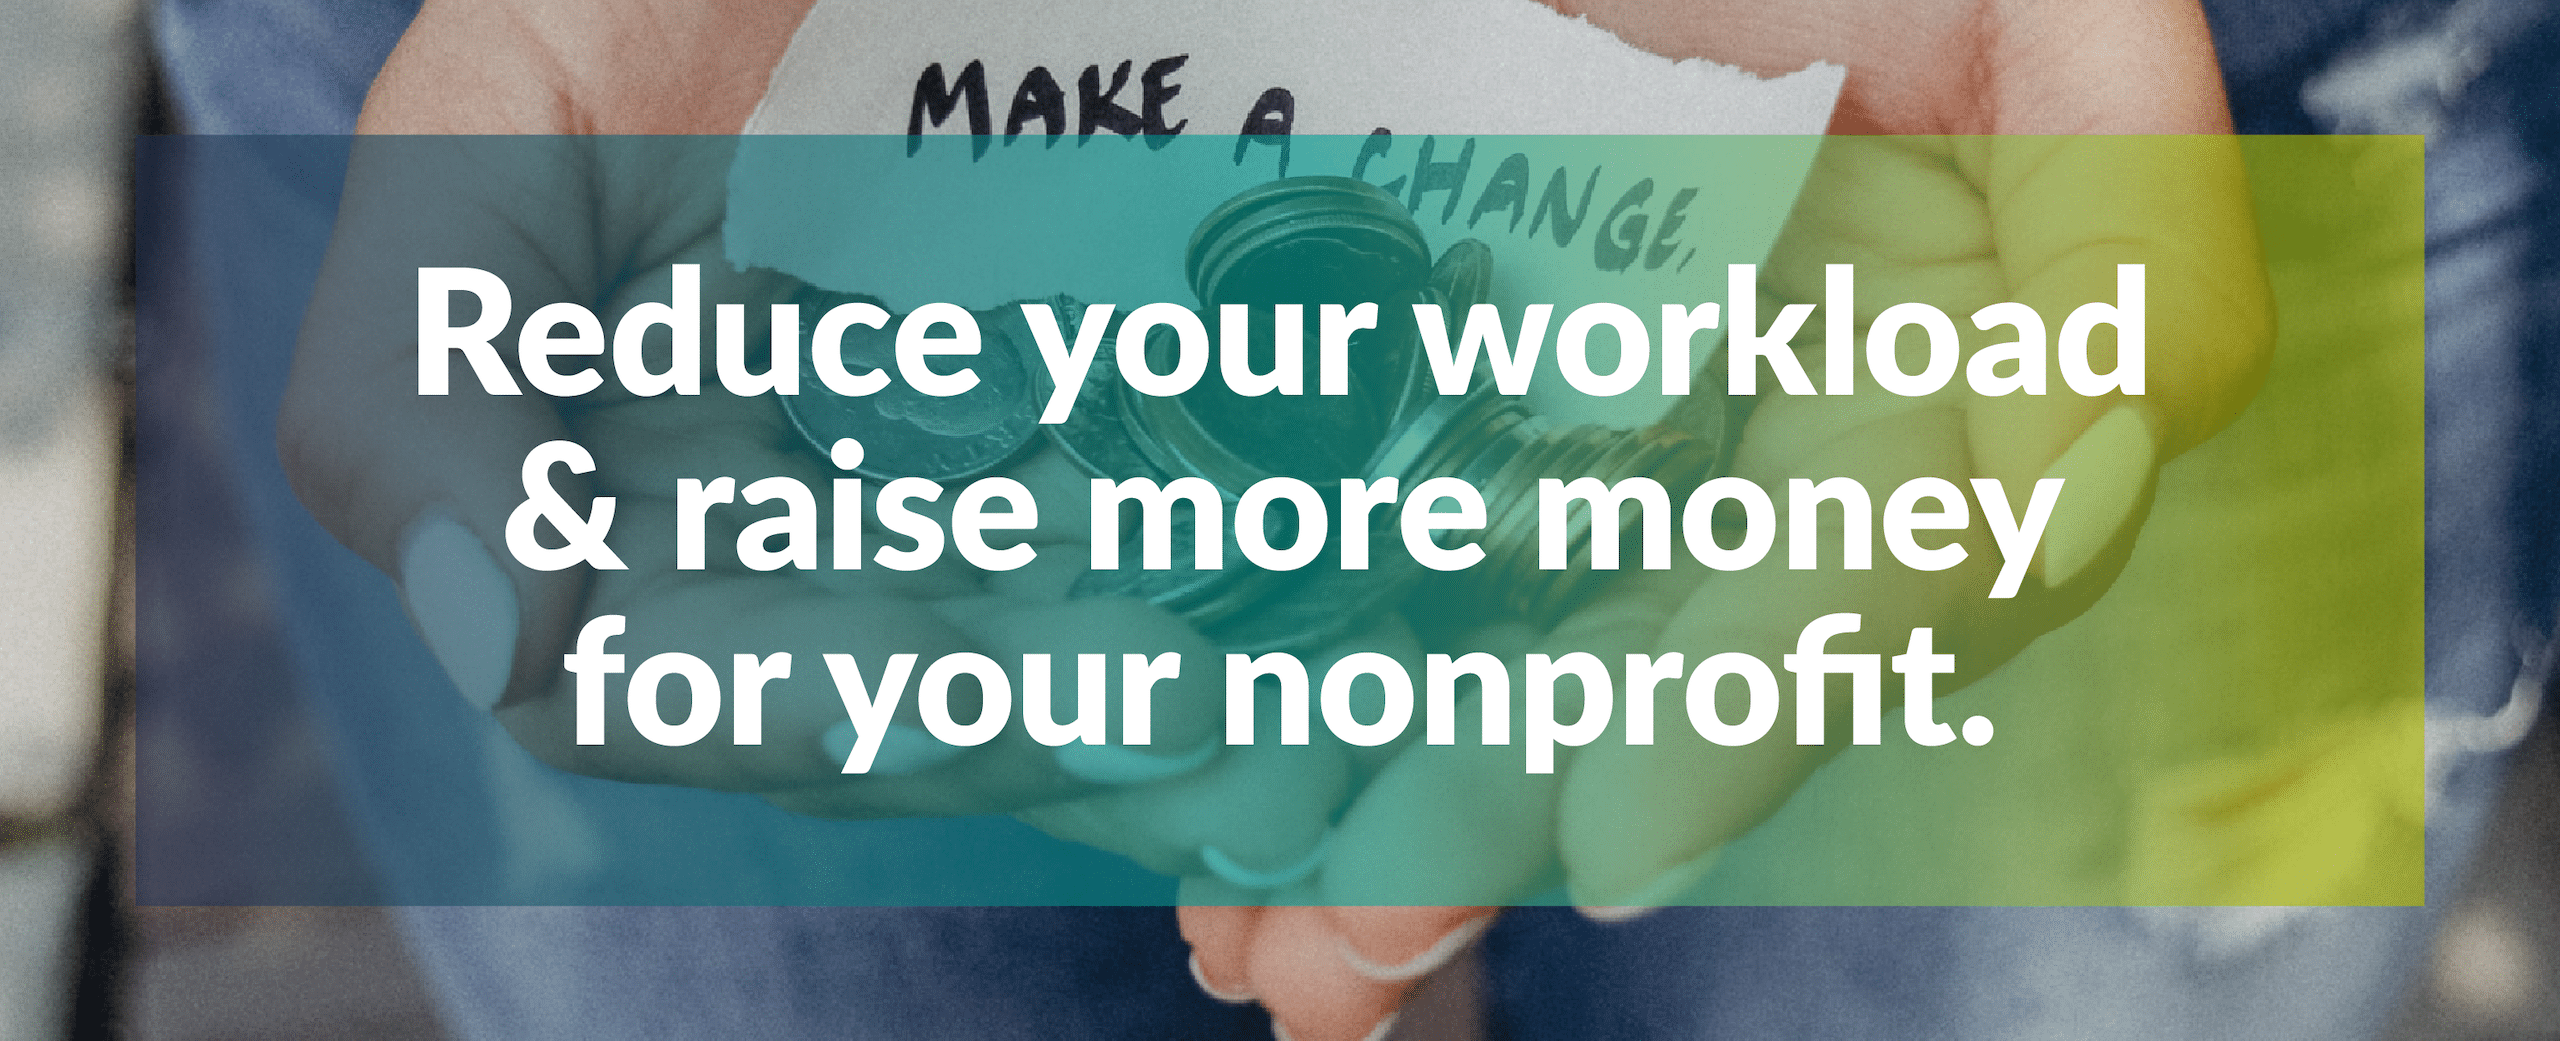 Reduce your workload & raise more money for your nonprofit